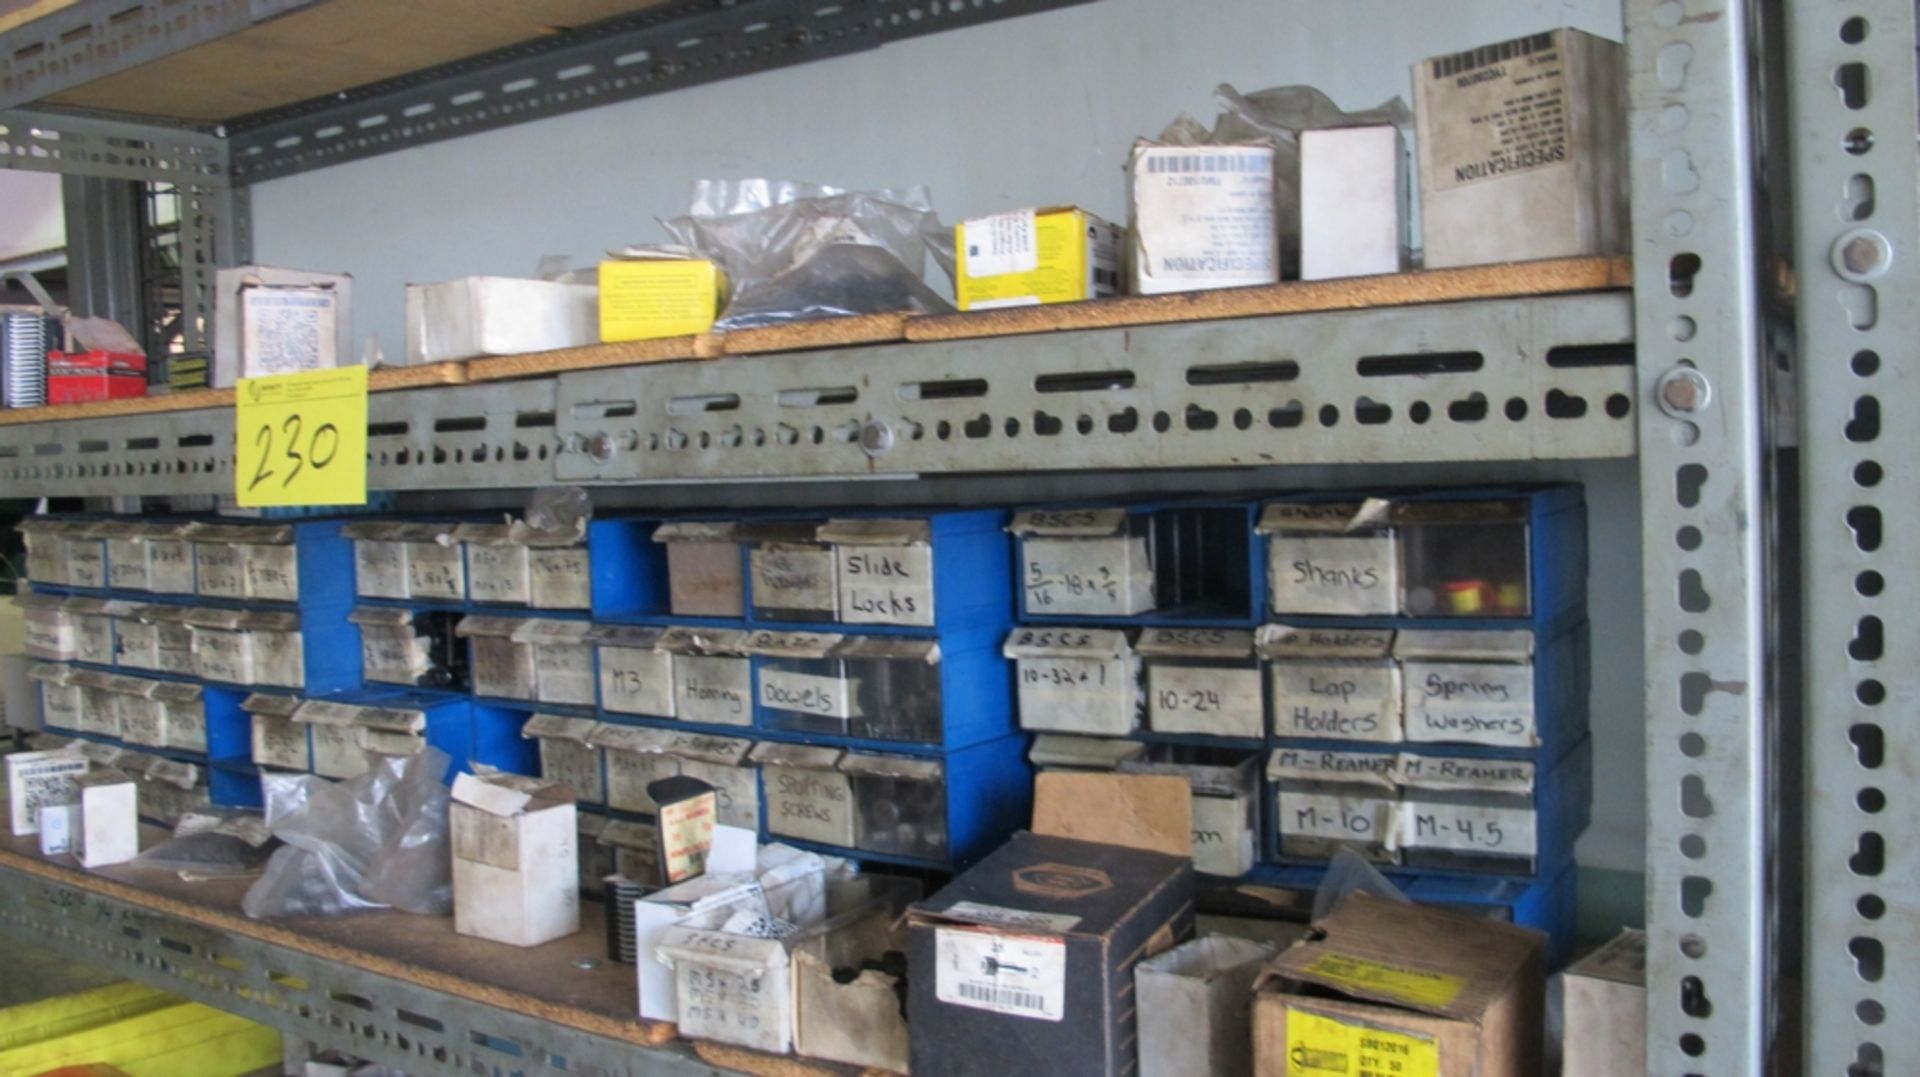 LOT OF (2) SECTIONS OF METAL SHELVING W/ CONTENTS, SHANKS, RADIUS GAUGES, FITTINGS, HARDWARE, ETC. - Image 6 of 8